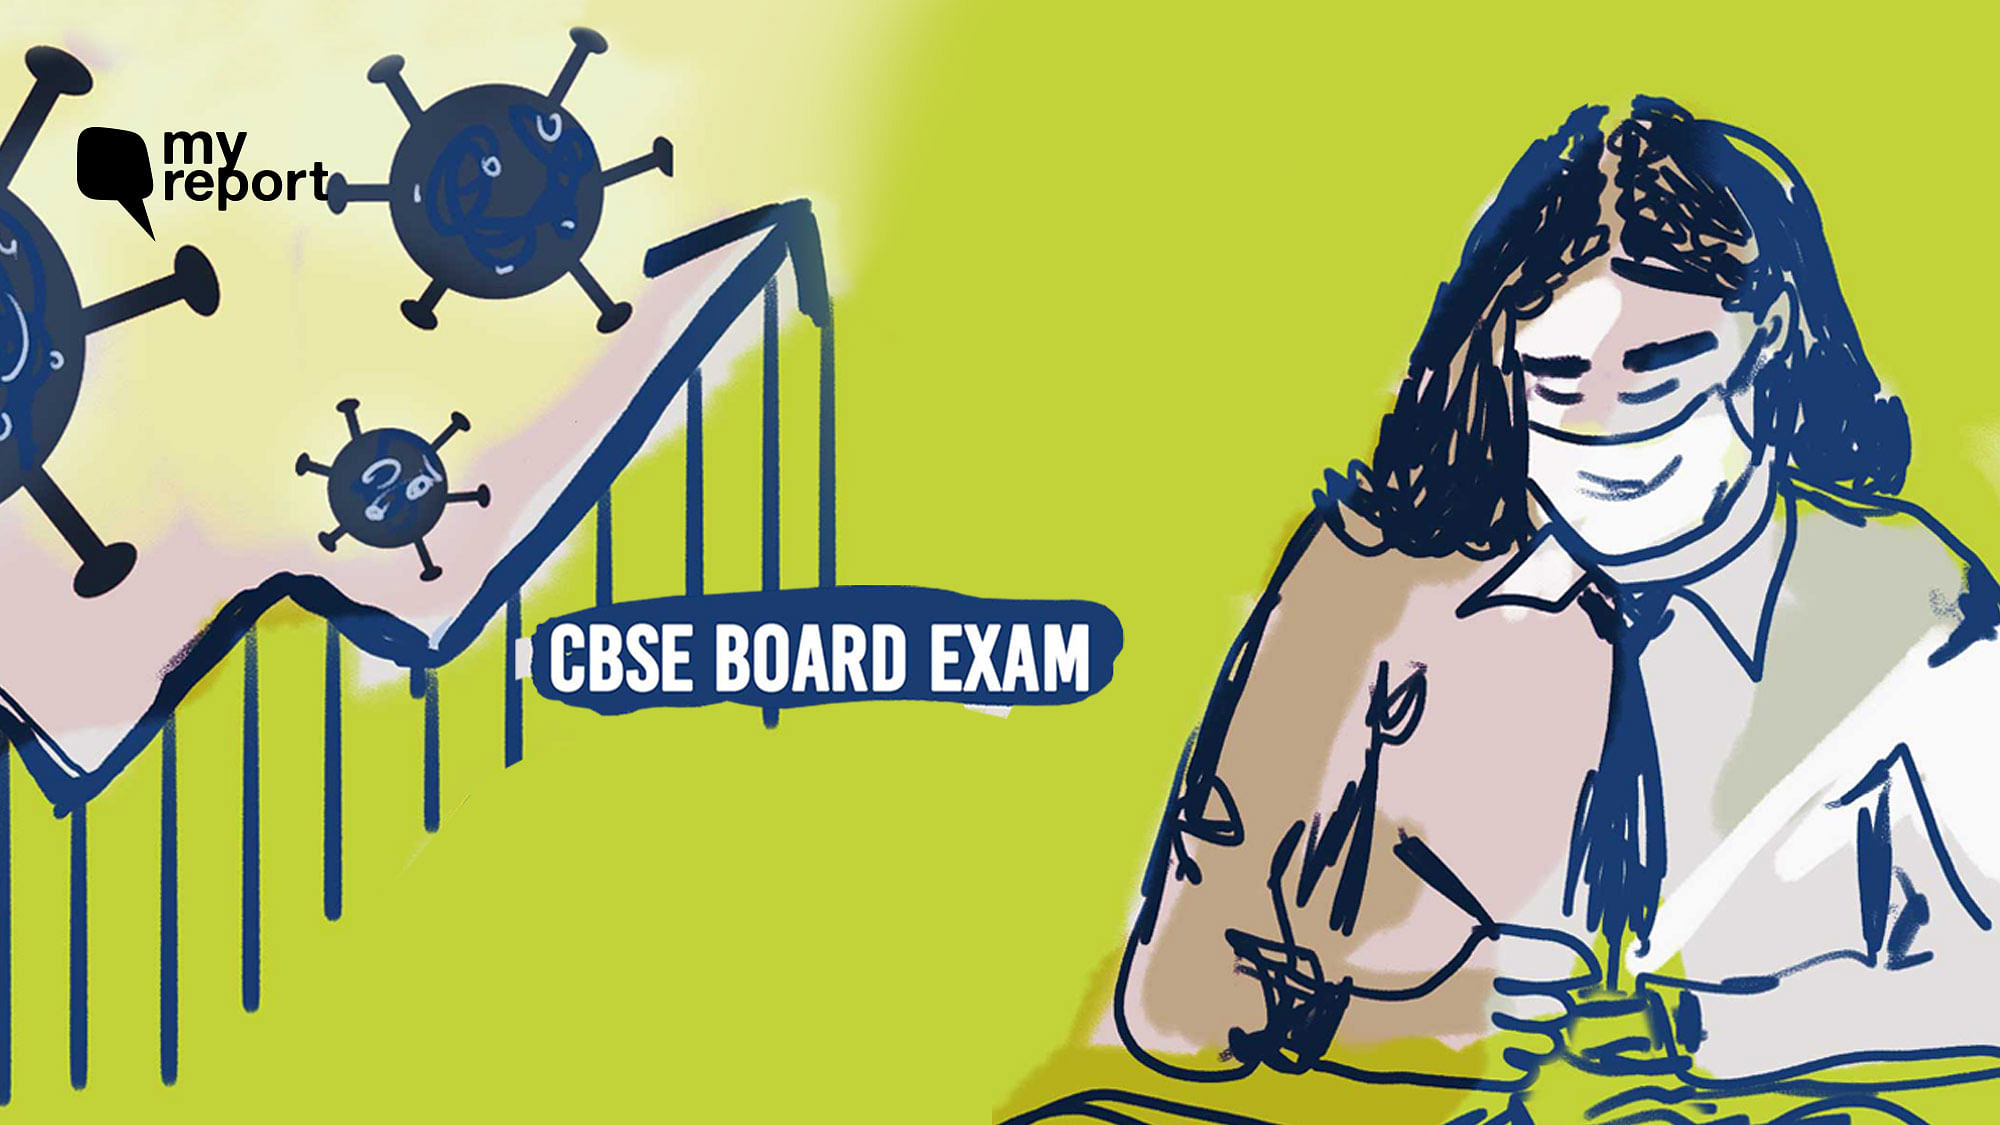 Board exams are scheduled from 4 May 2021.